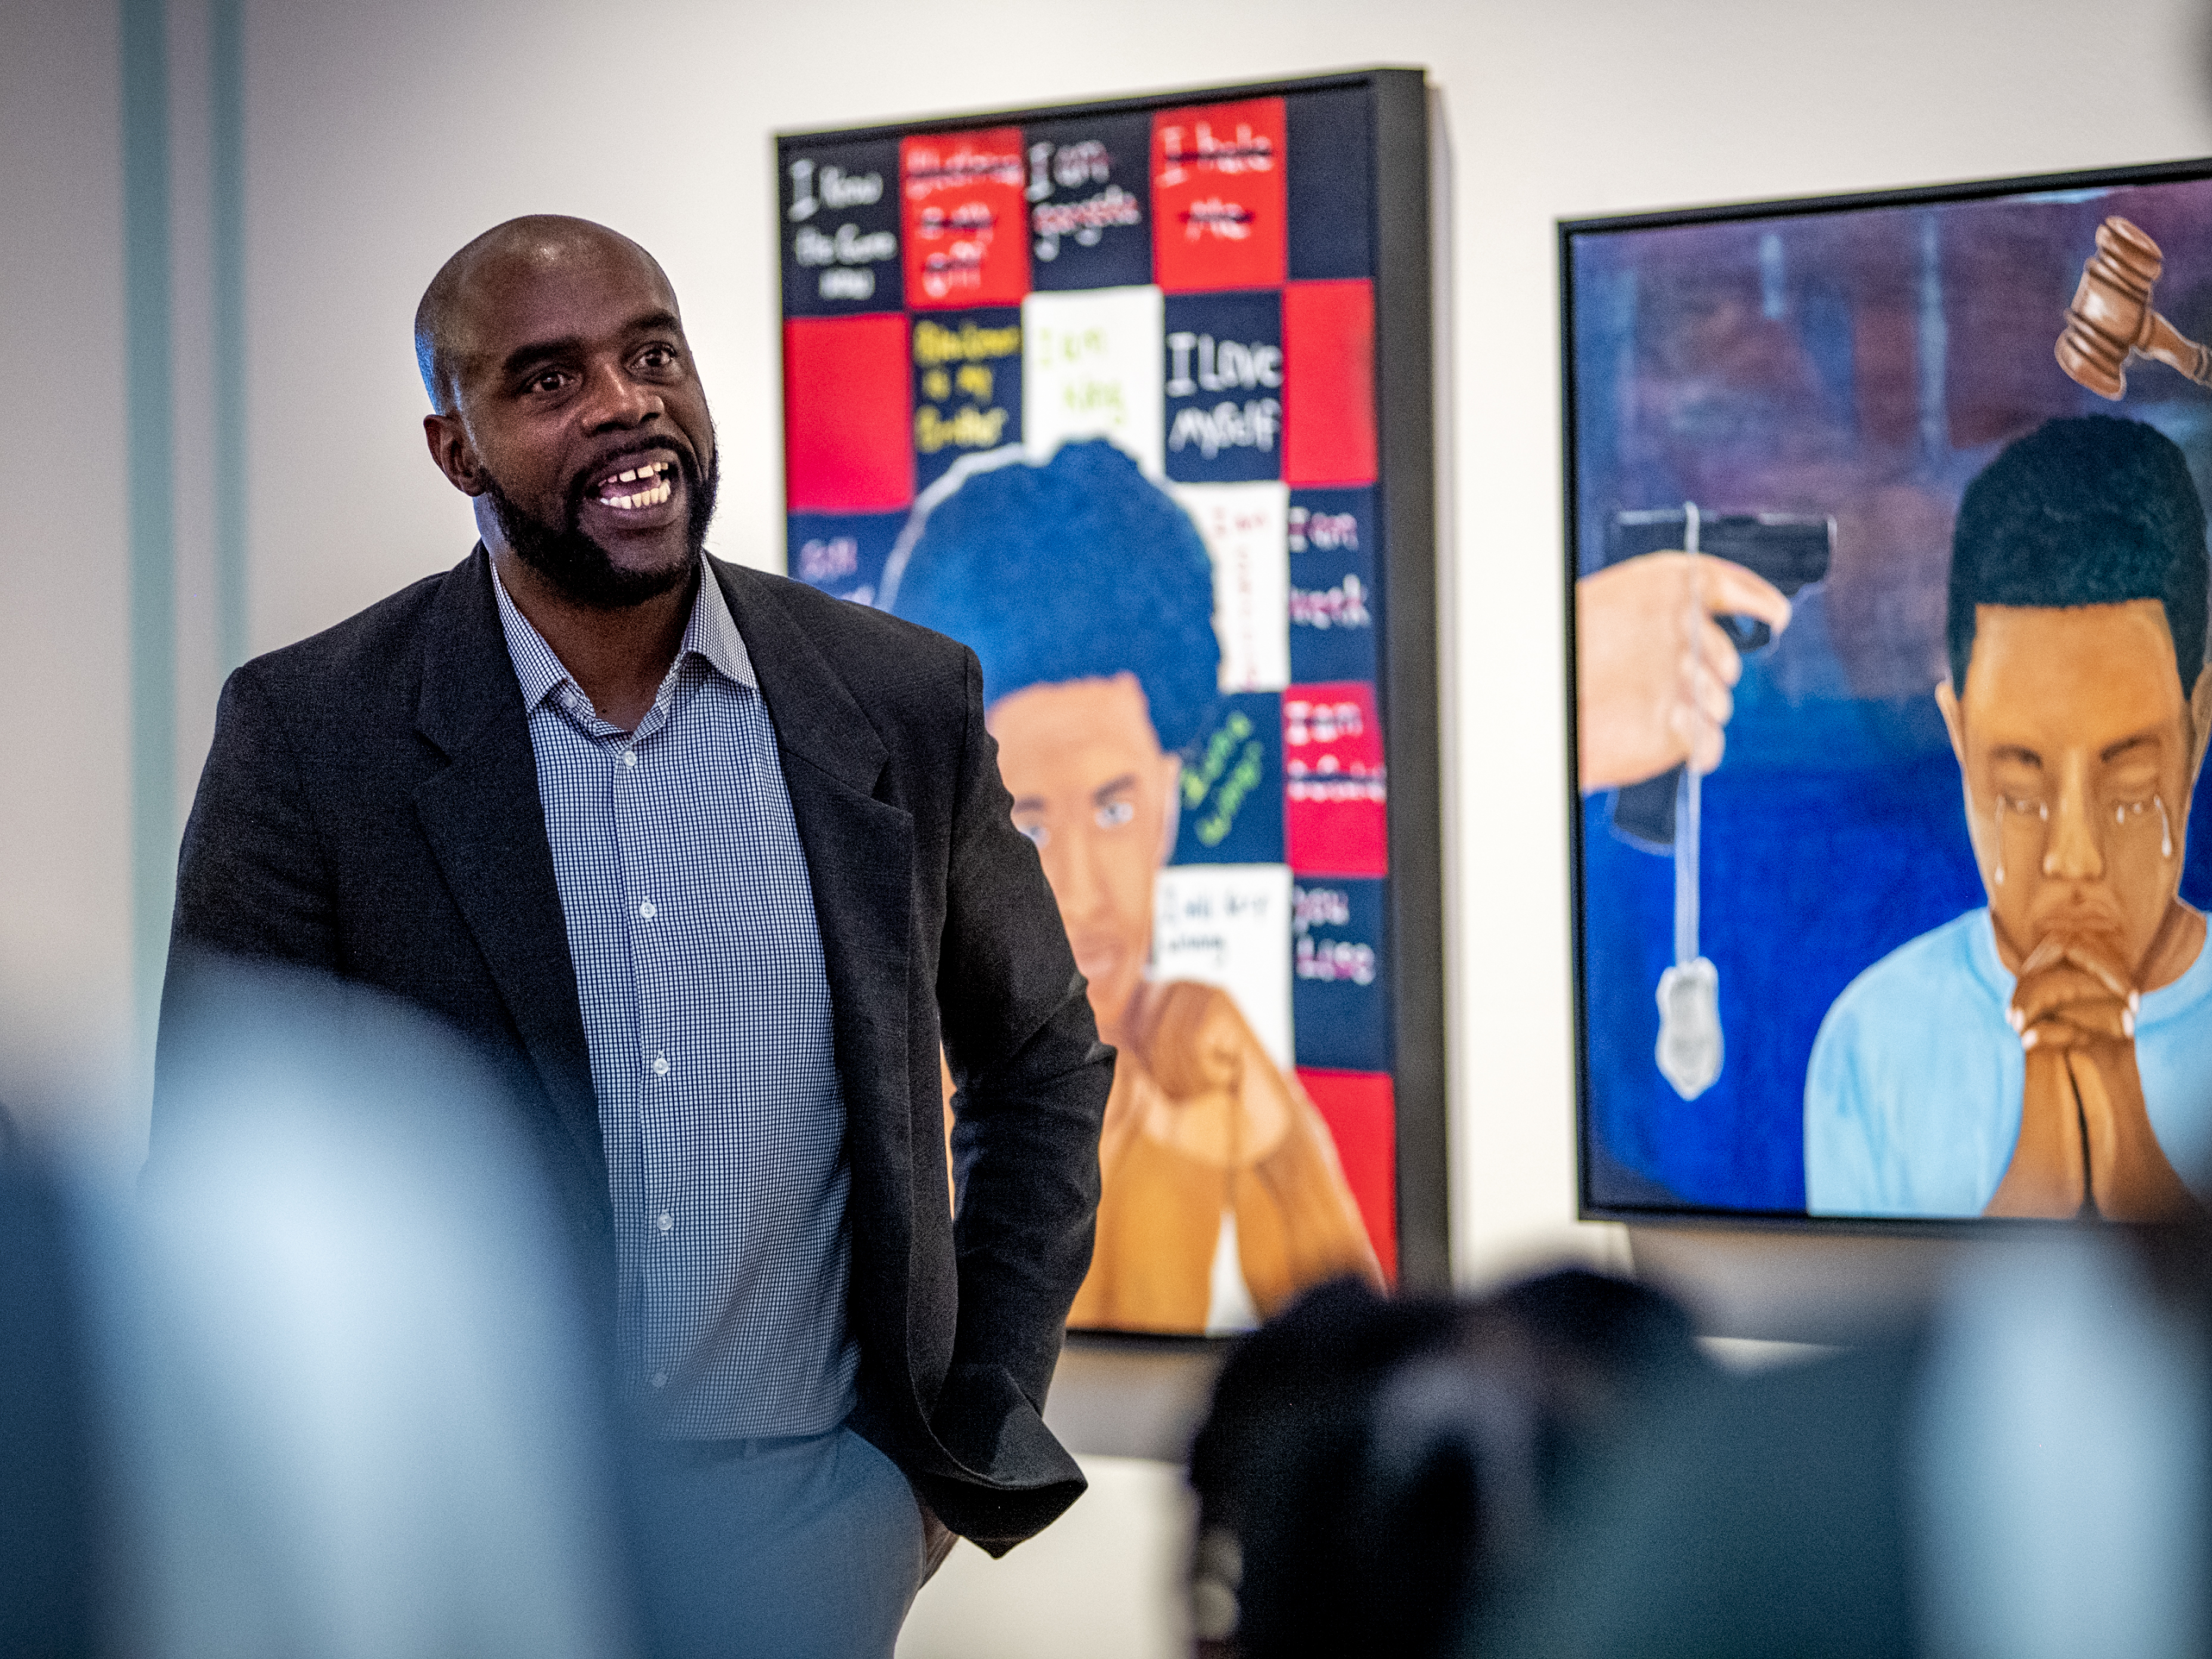 Robert Jones, artist and criminal justice reform activist who served over 23 years in prison for crimes he did not commit, discusses his paintings. Jones currently serves as the Director of Community Outreach for the Orleans Public Defenders Office.